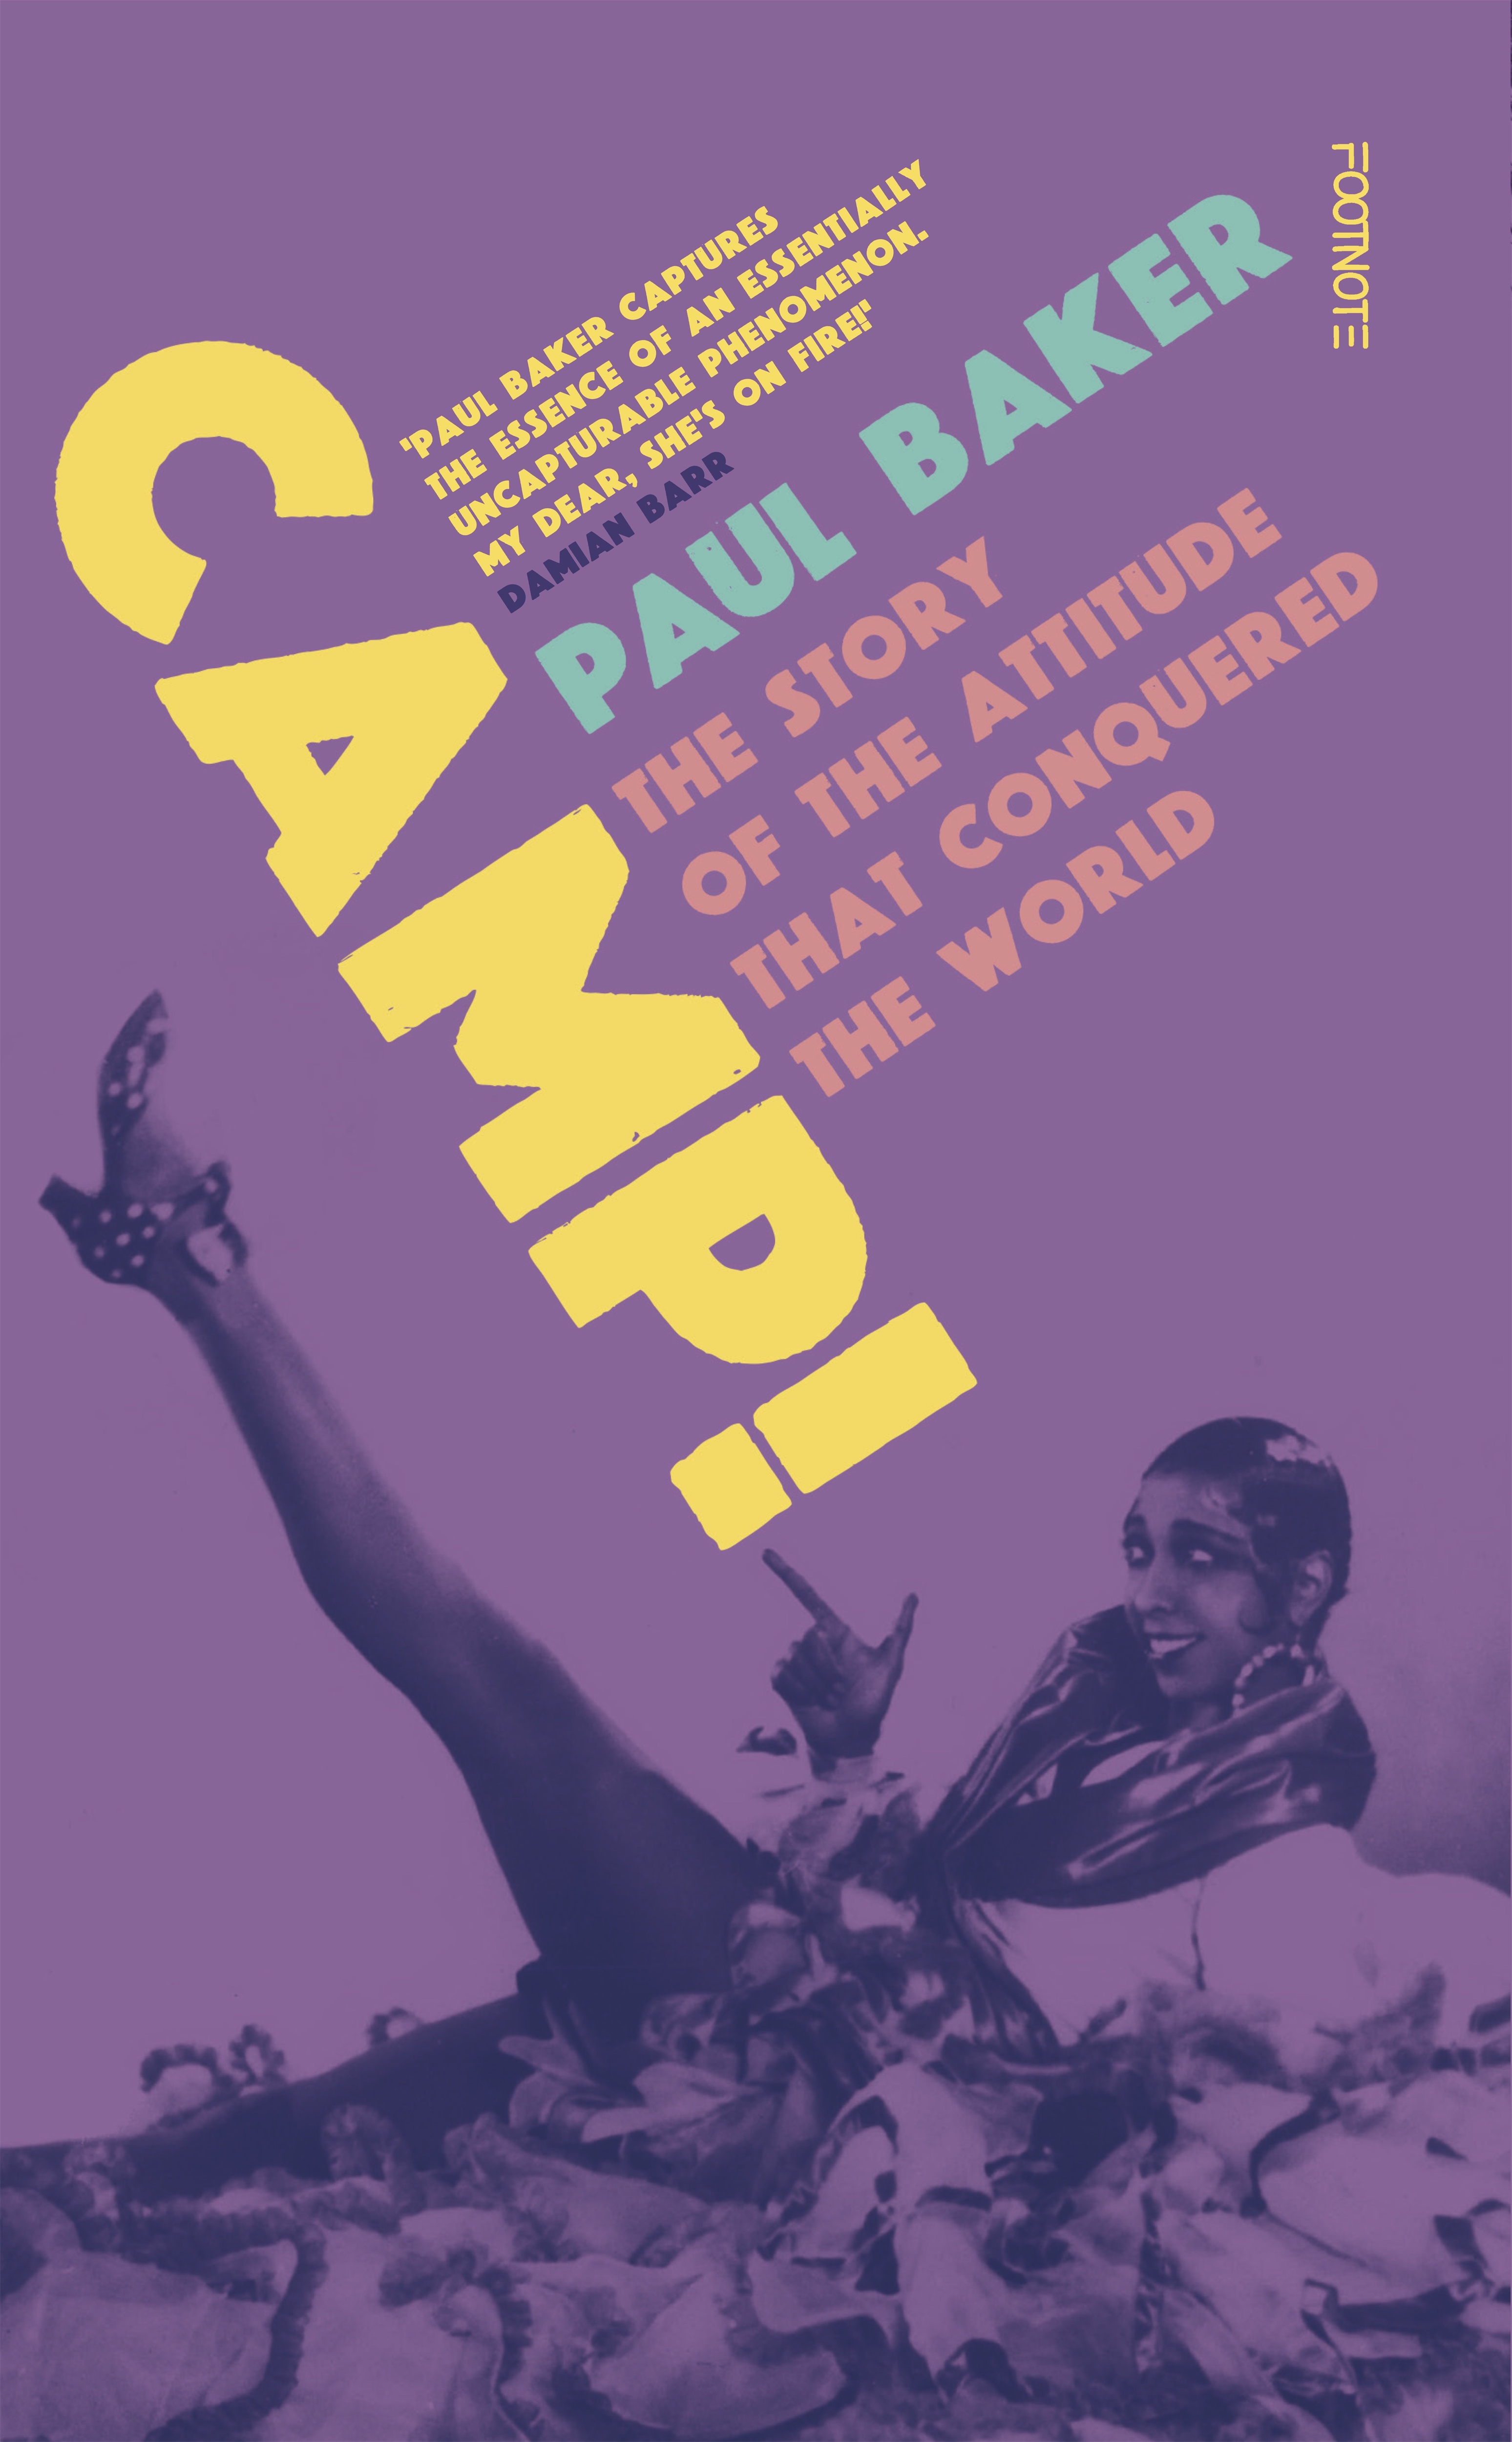 CAMP ! : THE STORY OF THE ATTITUDE THAT CONQUERED THE WORLD HC